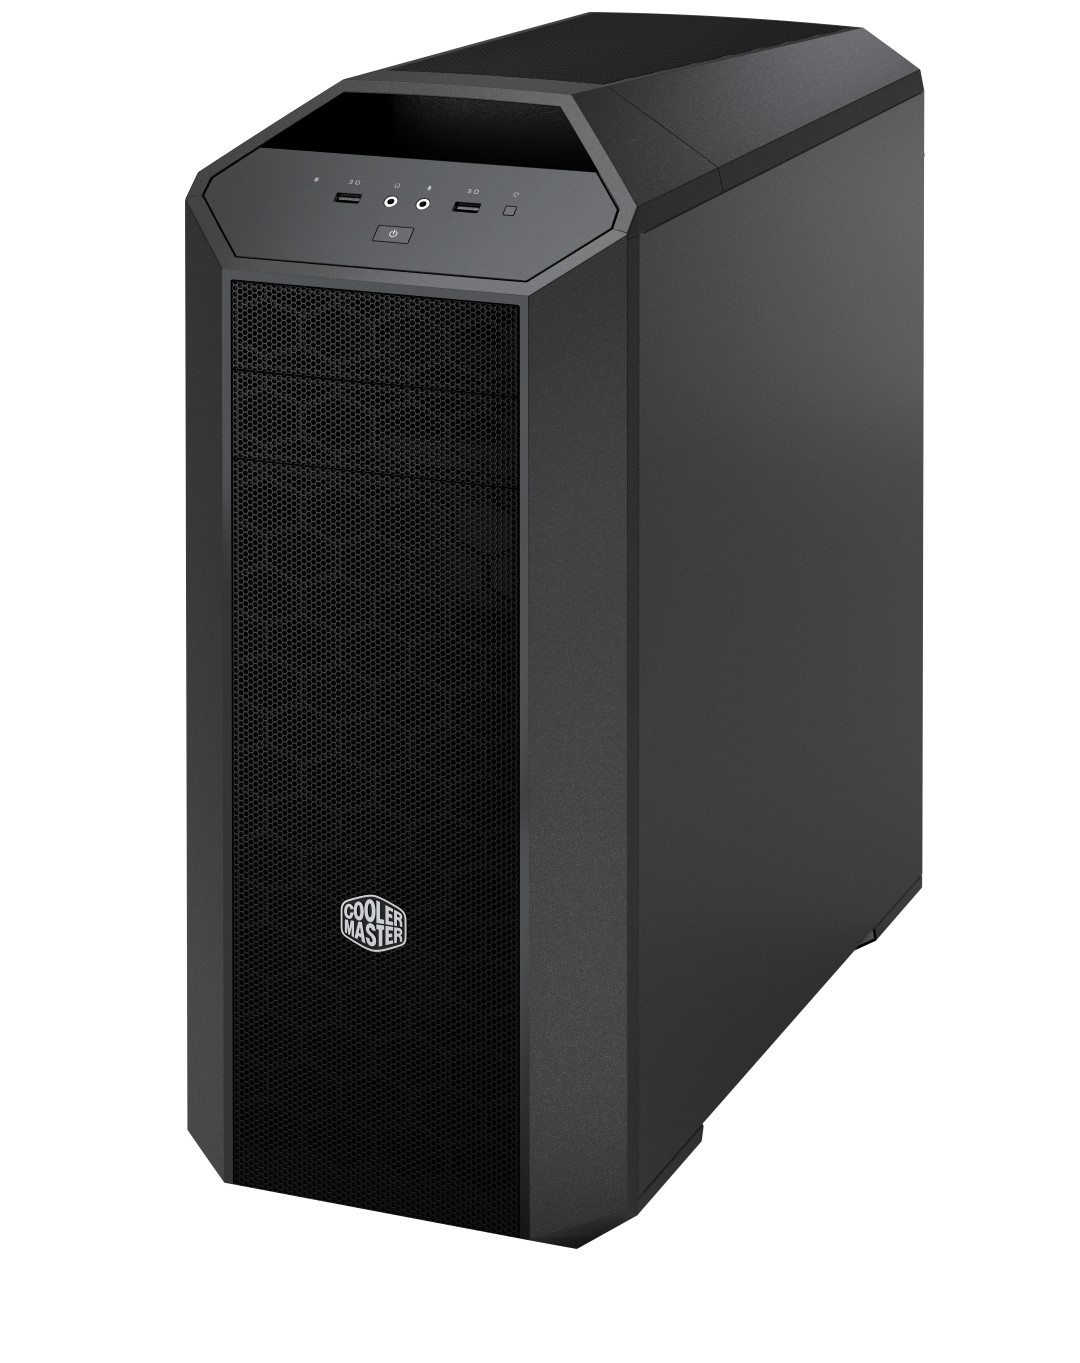 Cooler Master MasterCase 5 available on this 20th August 31